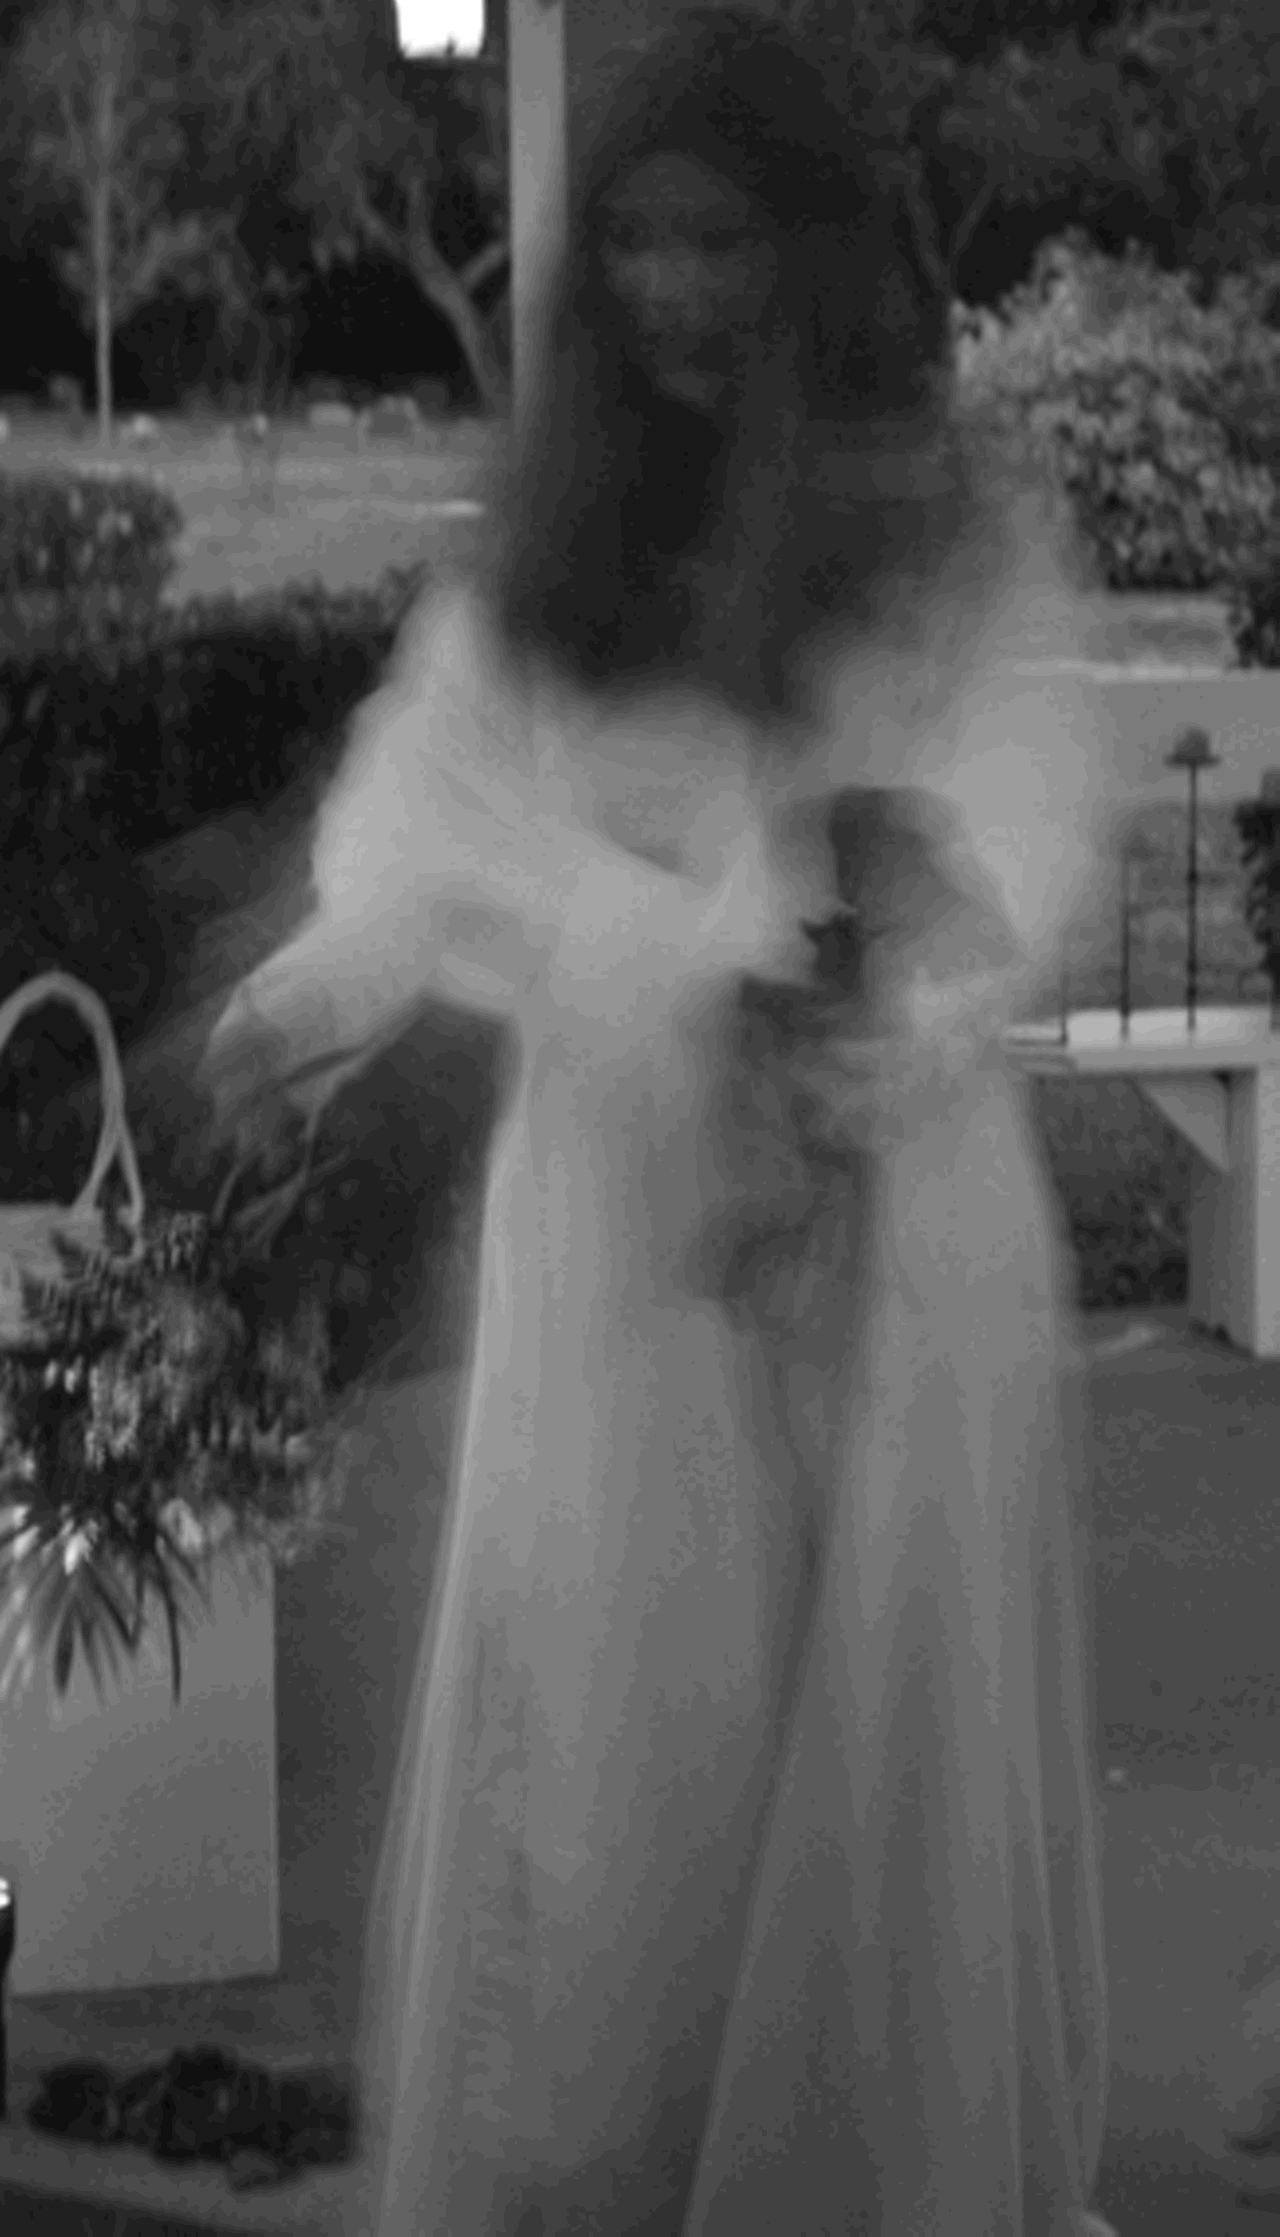 Lake Mary's Annual Ghost Walks
Embark on a walk around downtown Lake Mary and encounter ghosts of the past. Relive their stories as you hear true eerie tales. When: Saturday, Oct. 18 & Saturday, Oct. 25Where: 158 N Country Club Road, Lake MaryCost: $6Image via Lake Mary Life